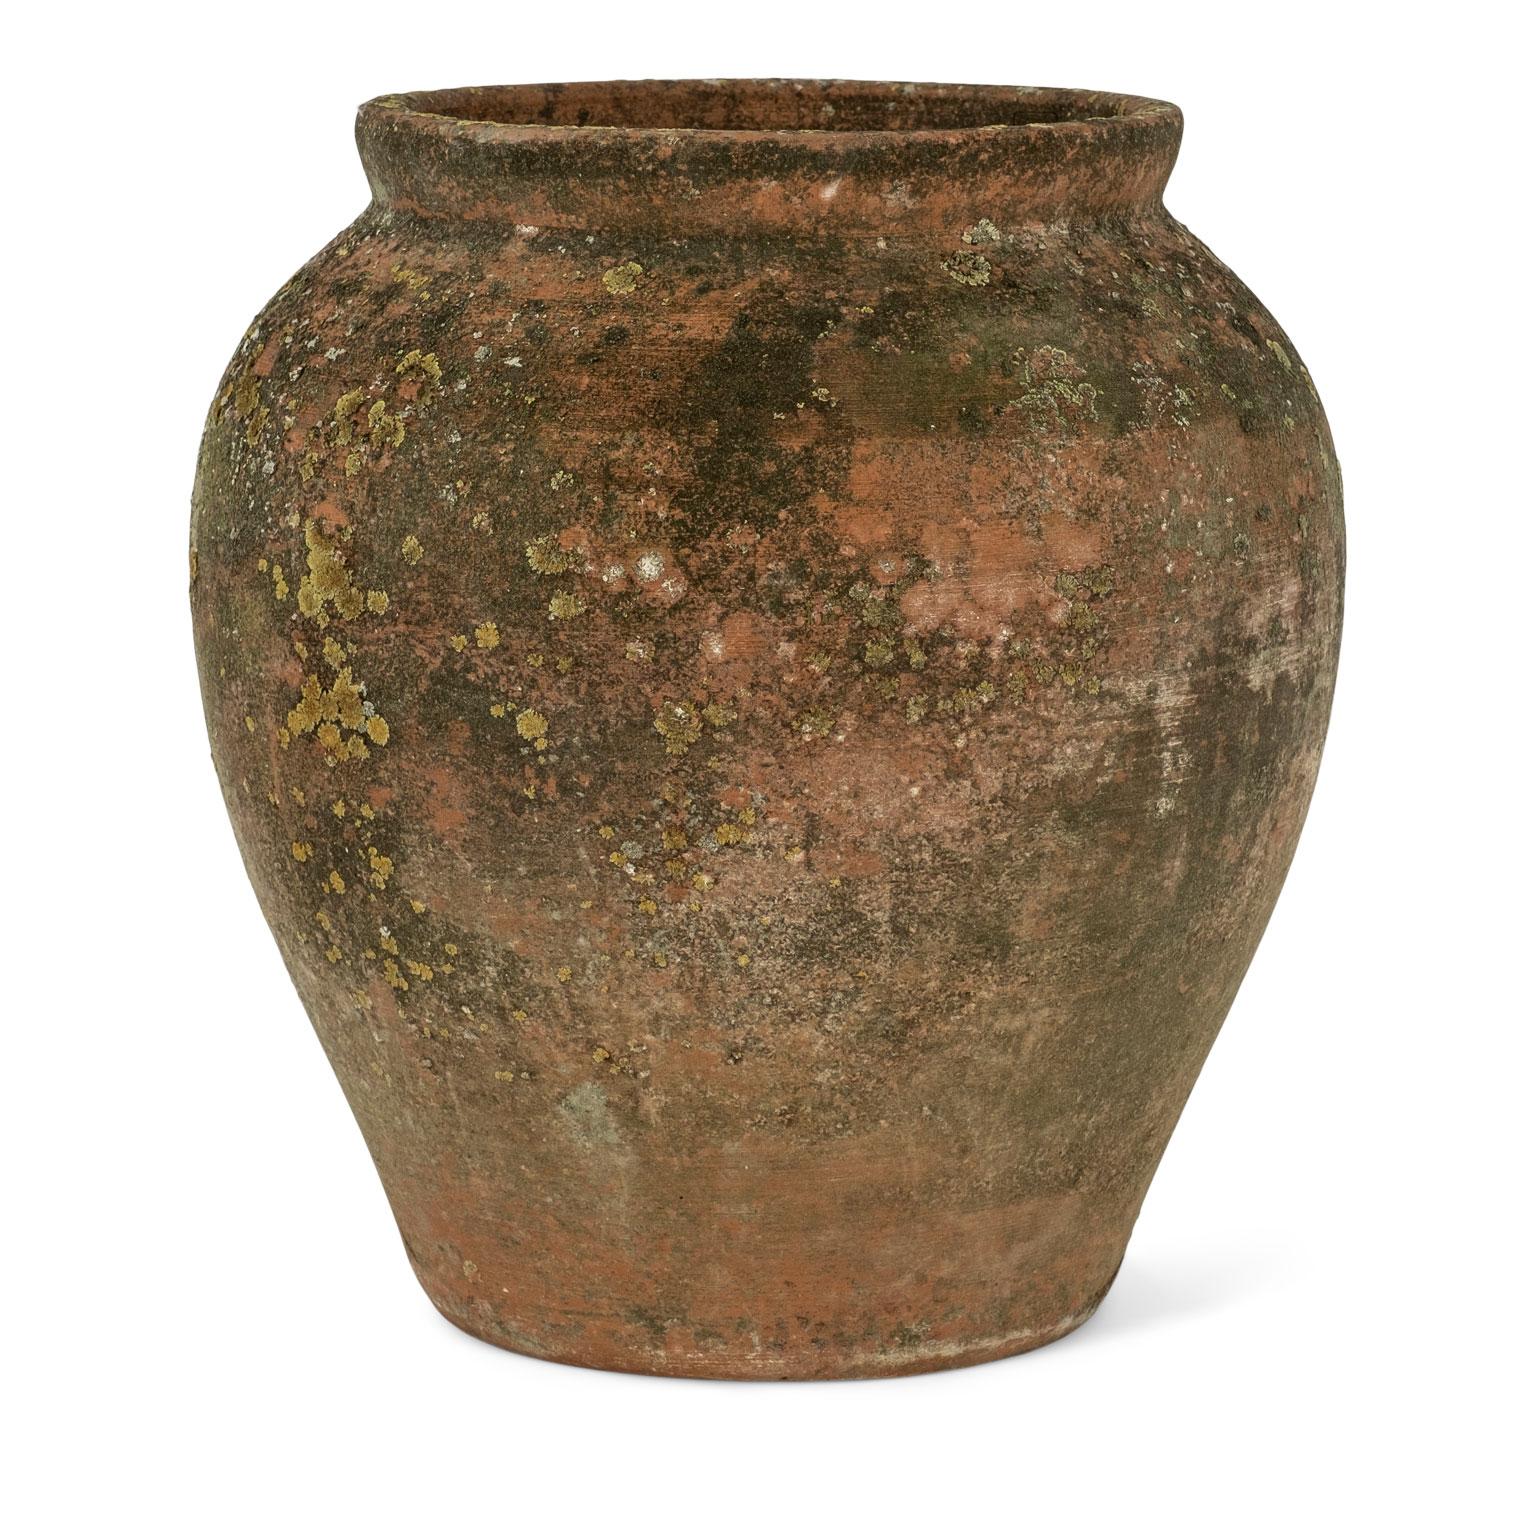 Antique urn-shape terracotta pot. Five available (see last image). Sold individually and priced $1,200 each.